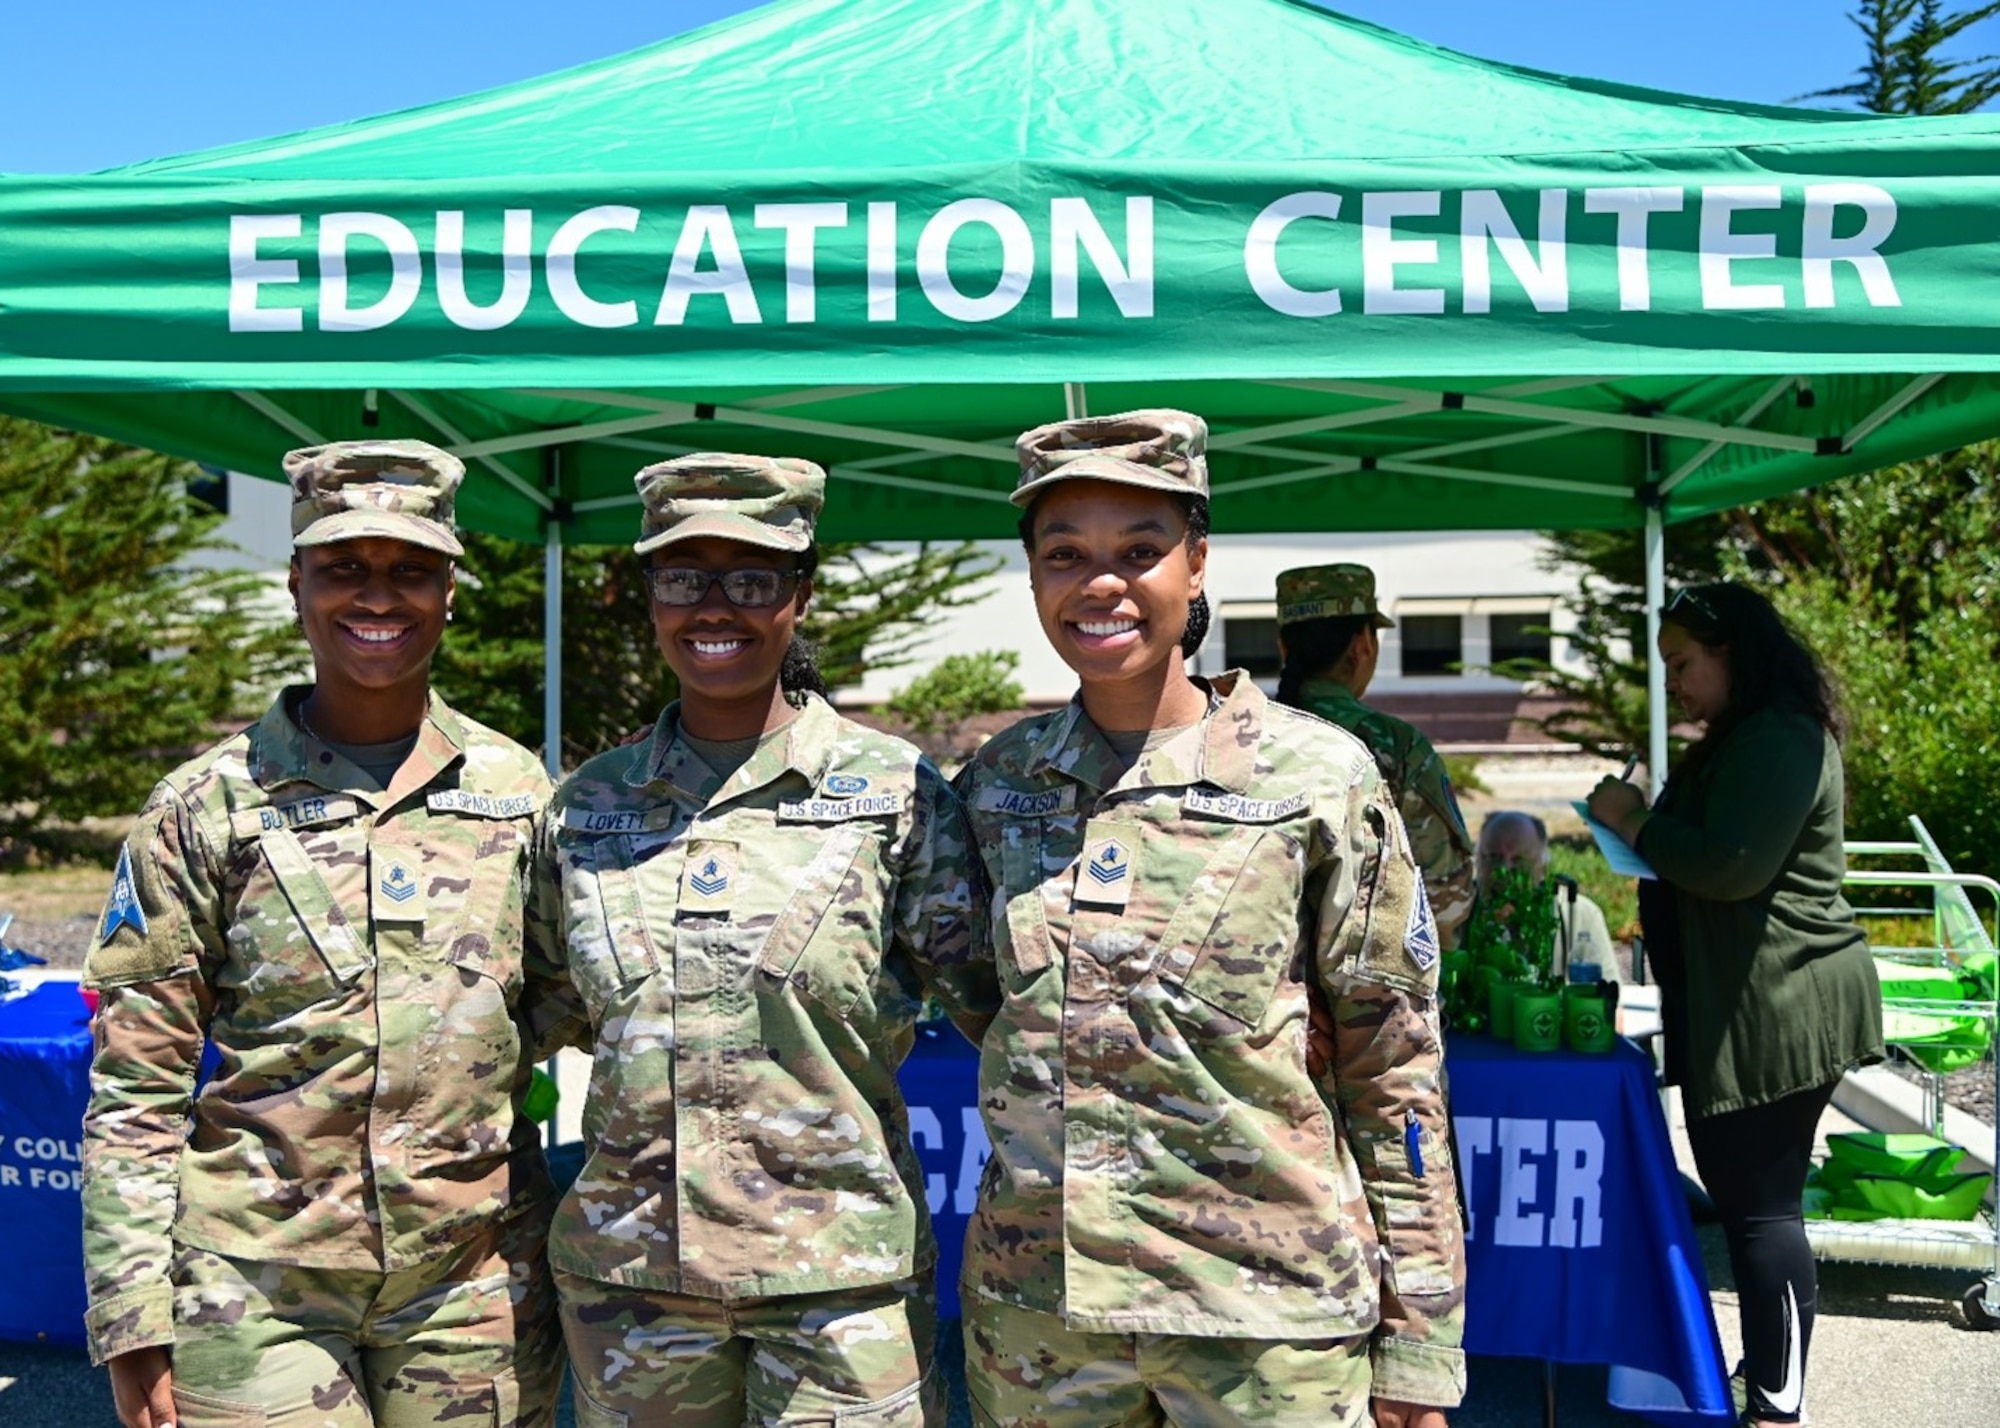 Three women in uniform pose for a picture.